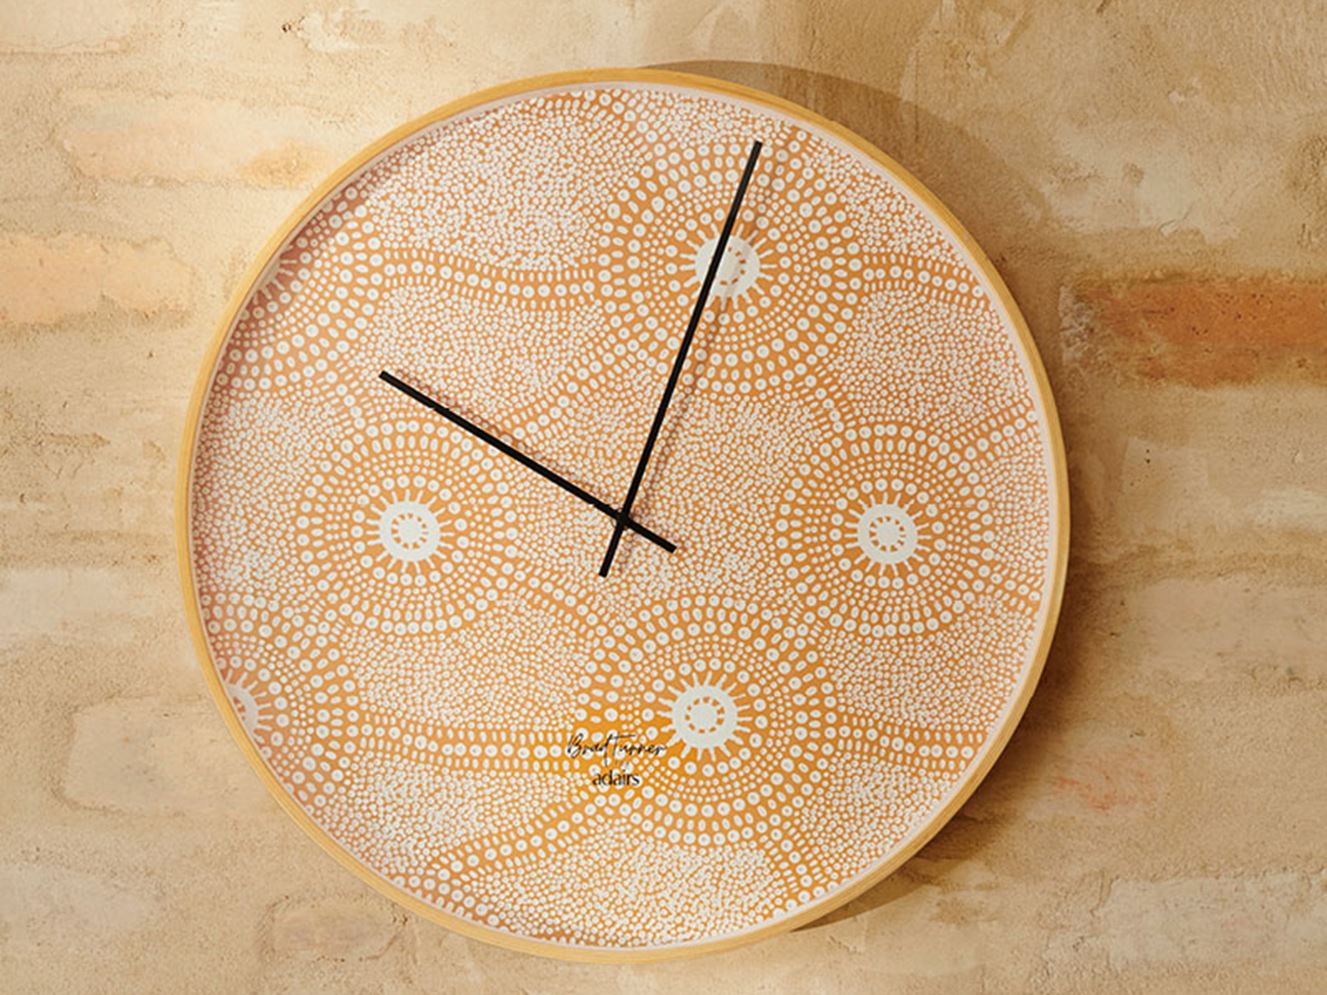 Circular analog wall clock against an earthy toned brick wall, with defined black hands contrasting against the vibrant orange dotted design. 